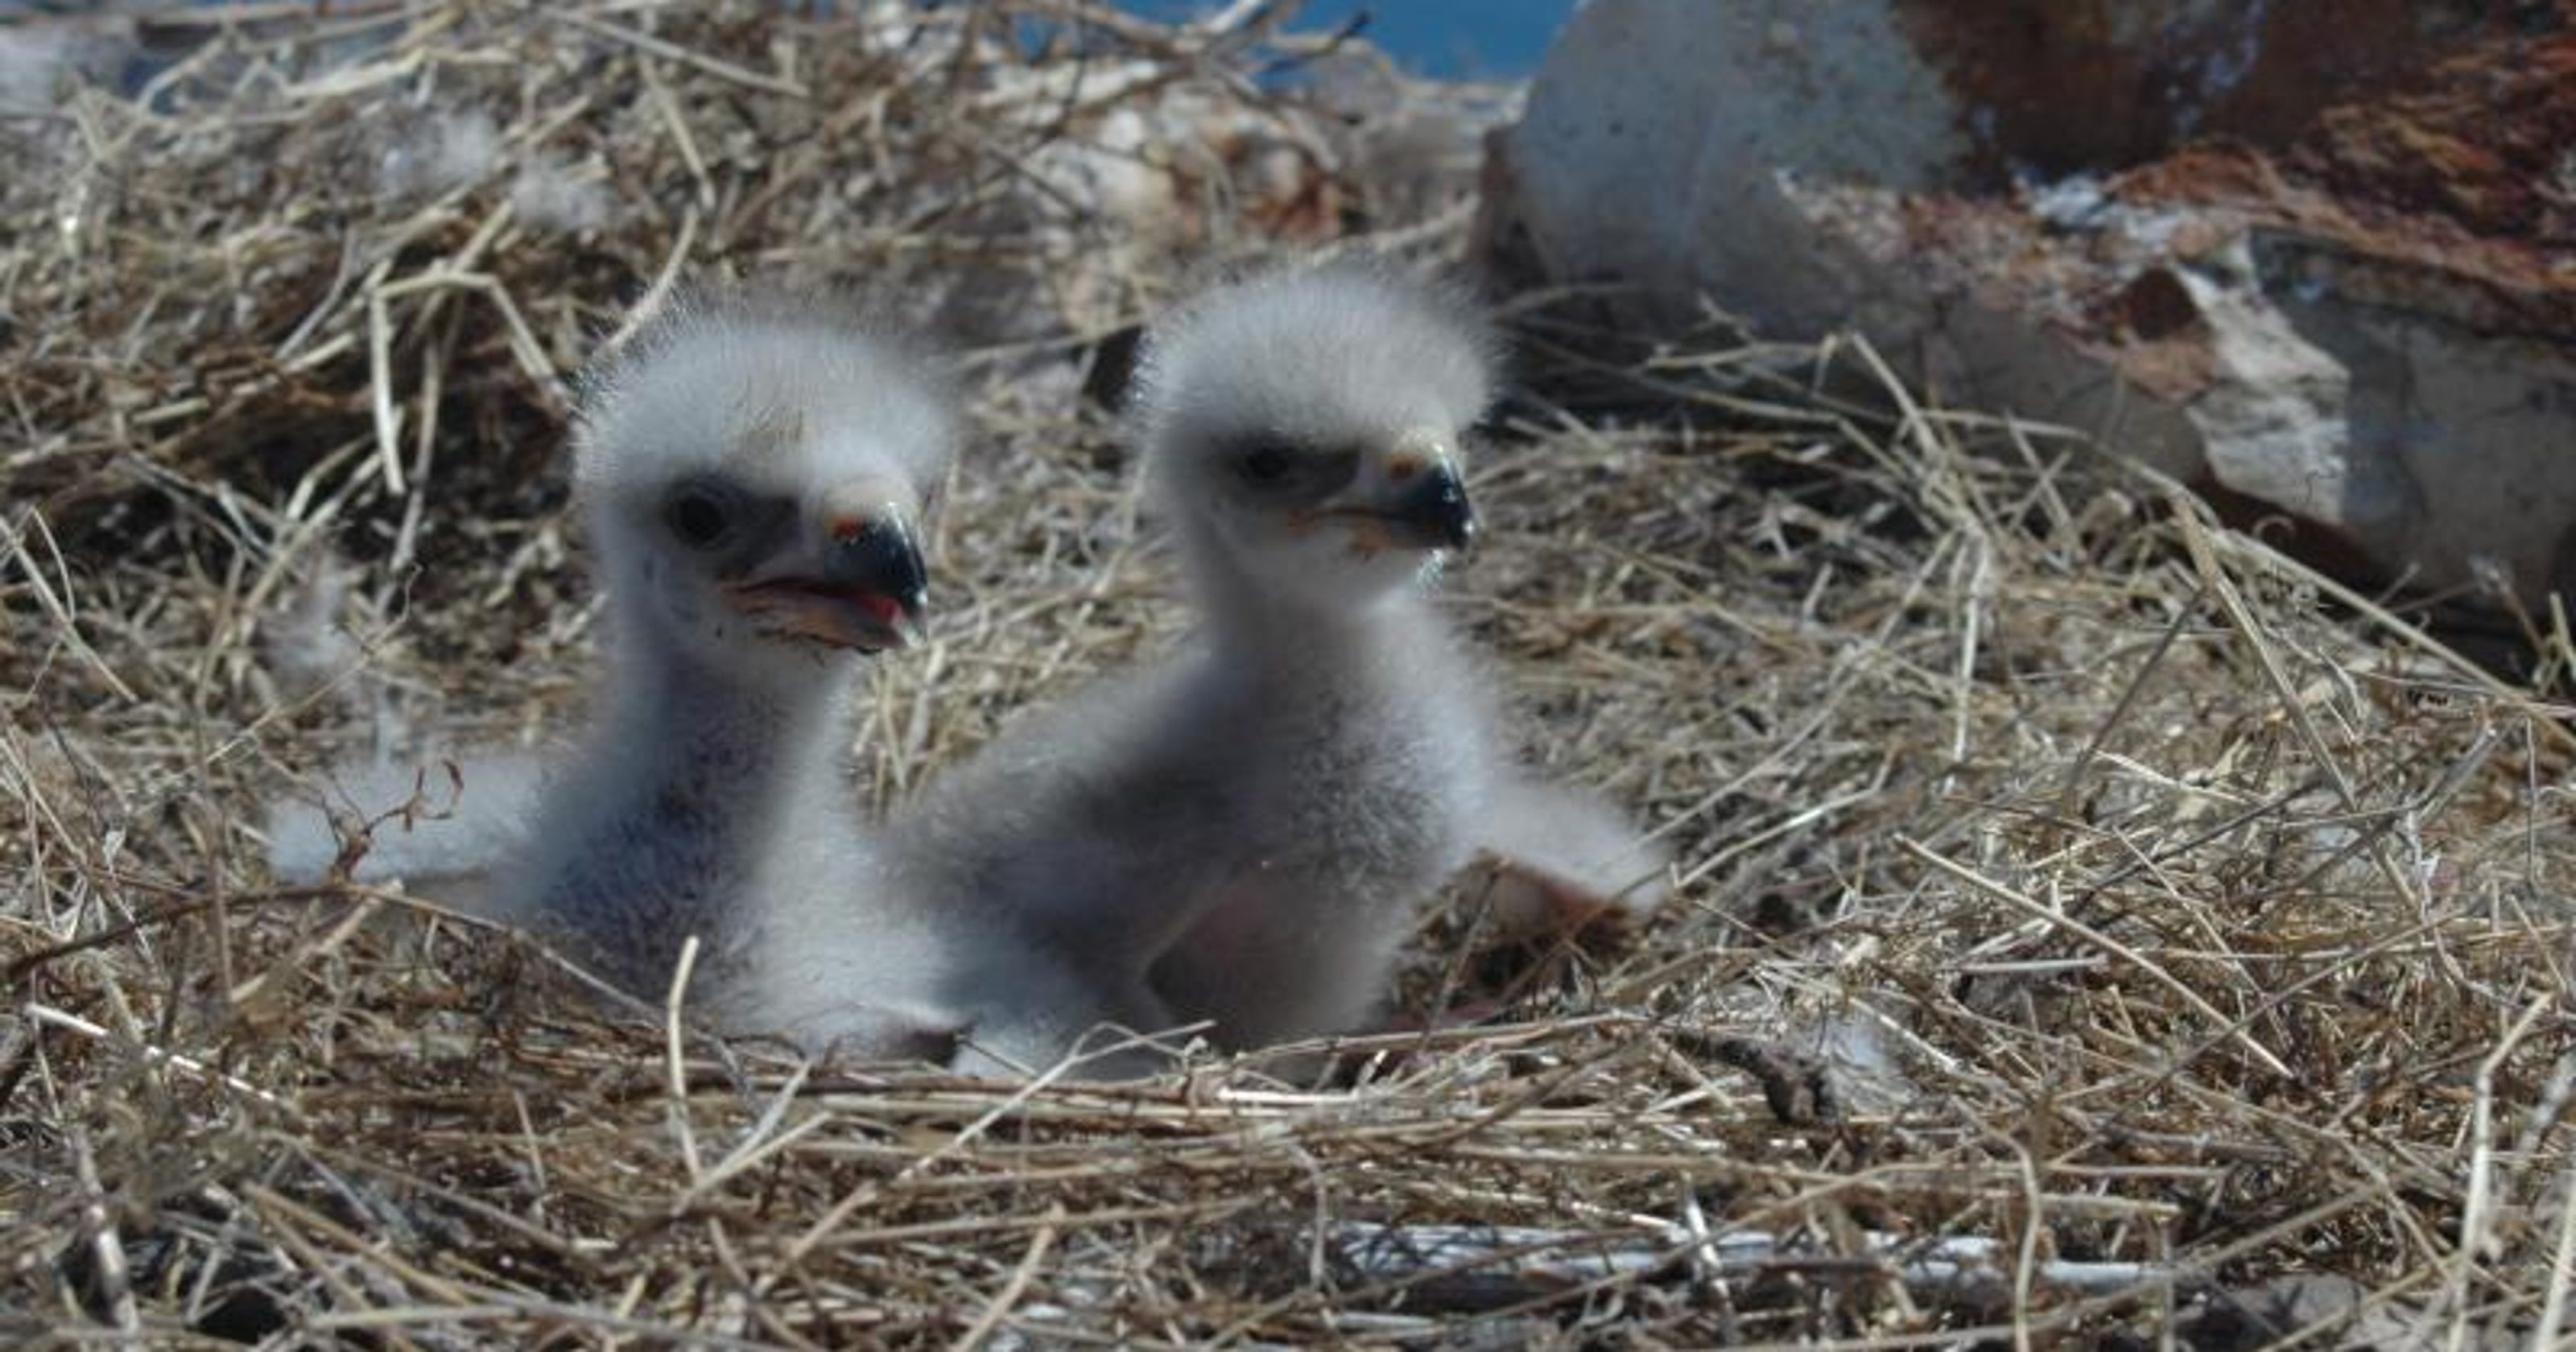 Bald eagle chicks are hatching on Channel Islands off California coast